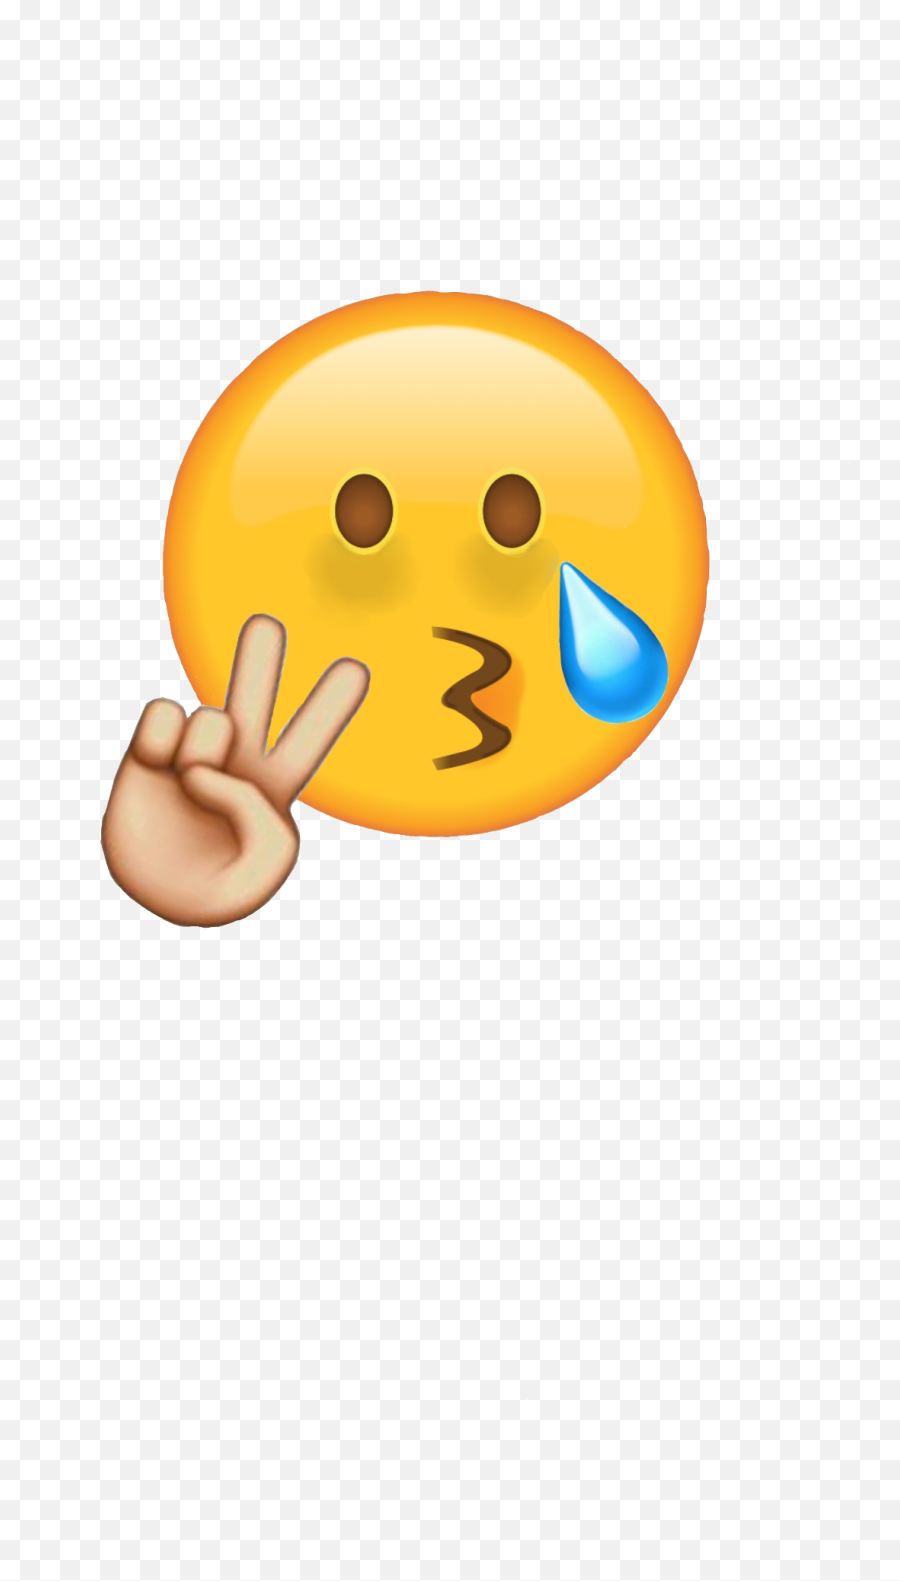 Mentalbreakdown Cry Peacesign Peace Sticker By Lauren - Crying Sad Emoji With Peace Sign Png,Peace Sign Emoji Png